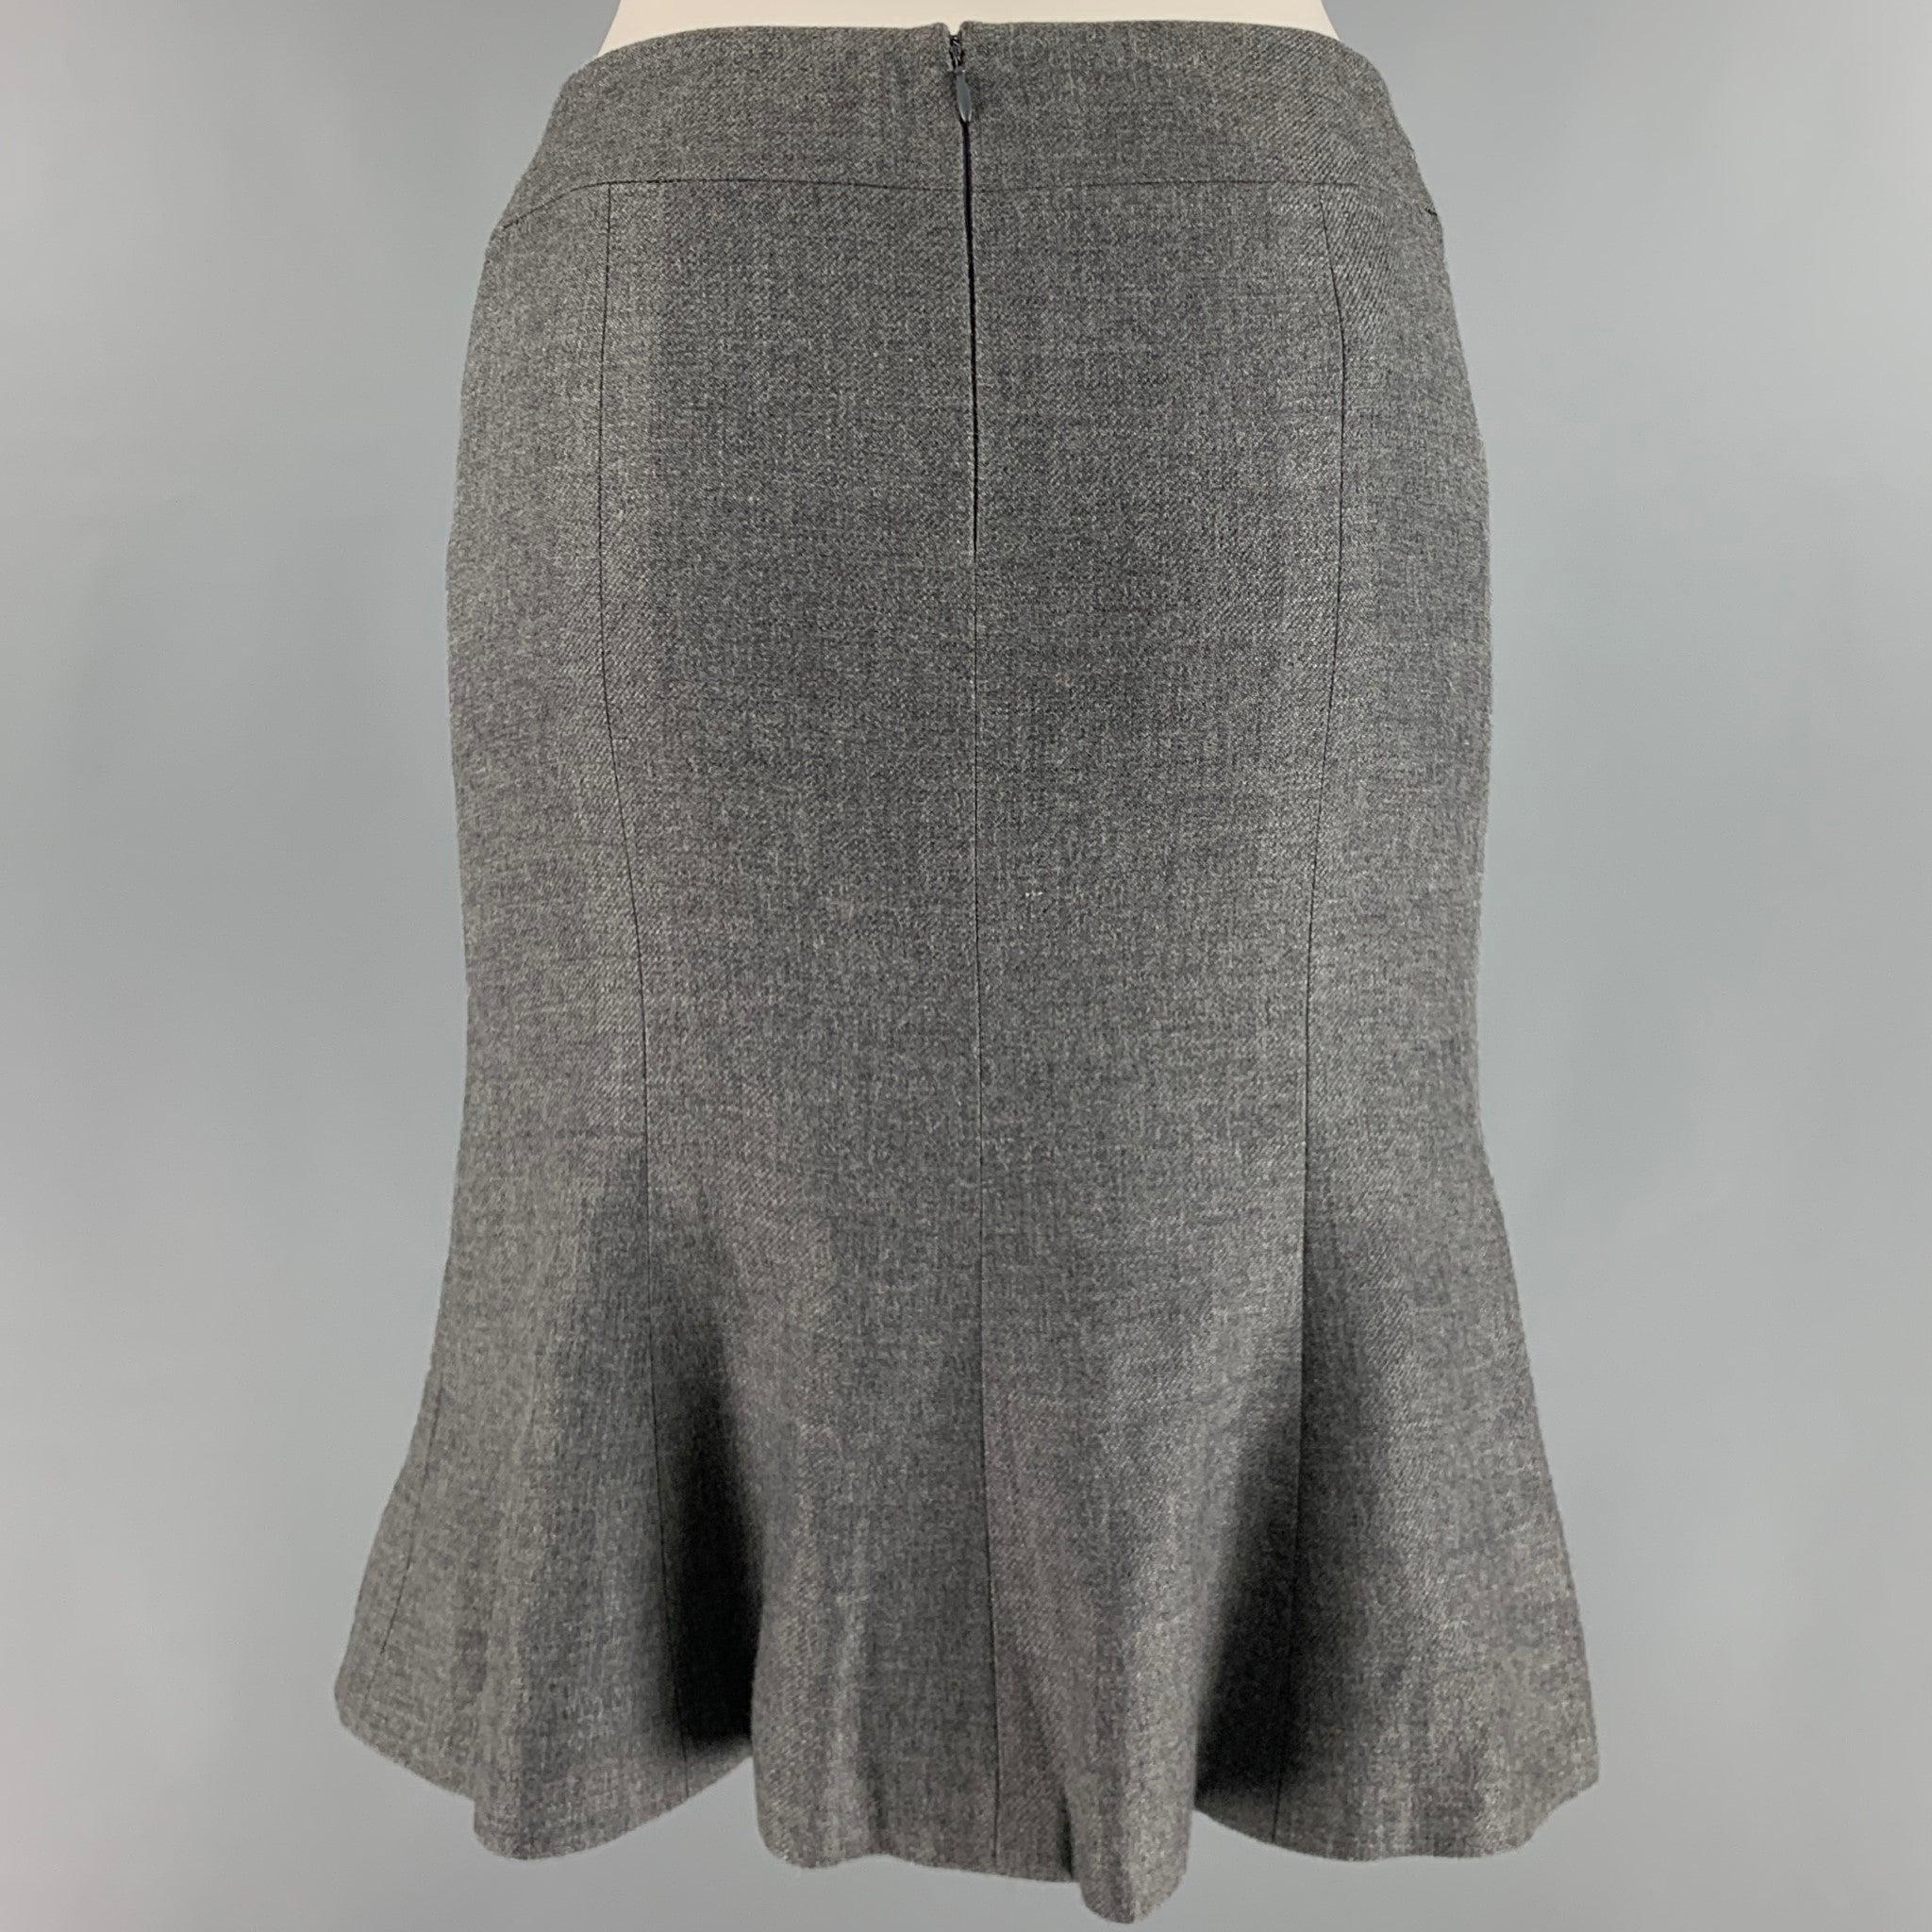 CHANEL Size 2 Grey Linen Cashmere A-Line Skirt In Excellent Condition For Sale In San Francisco, CA